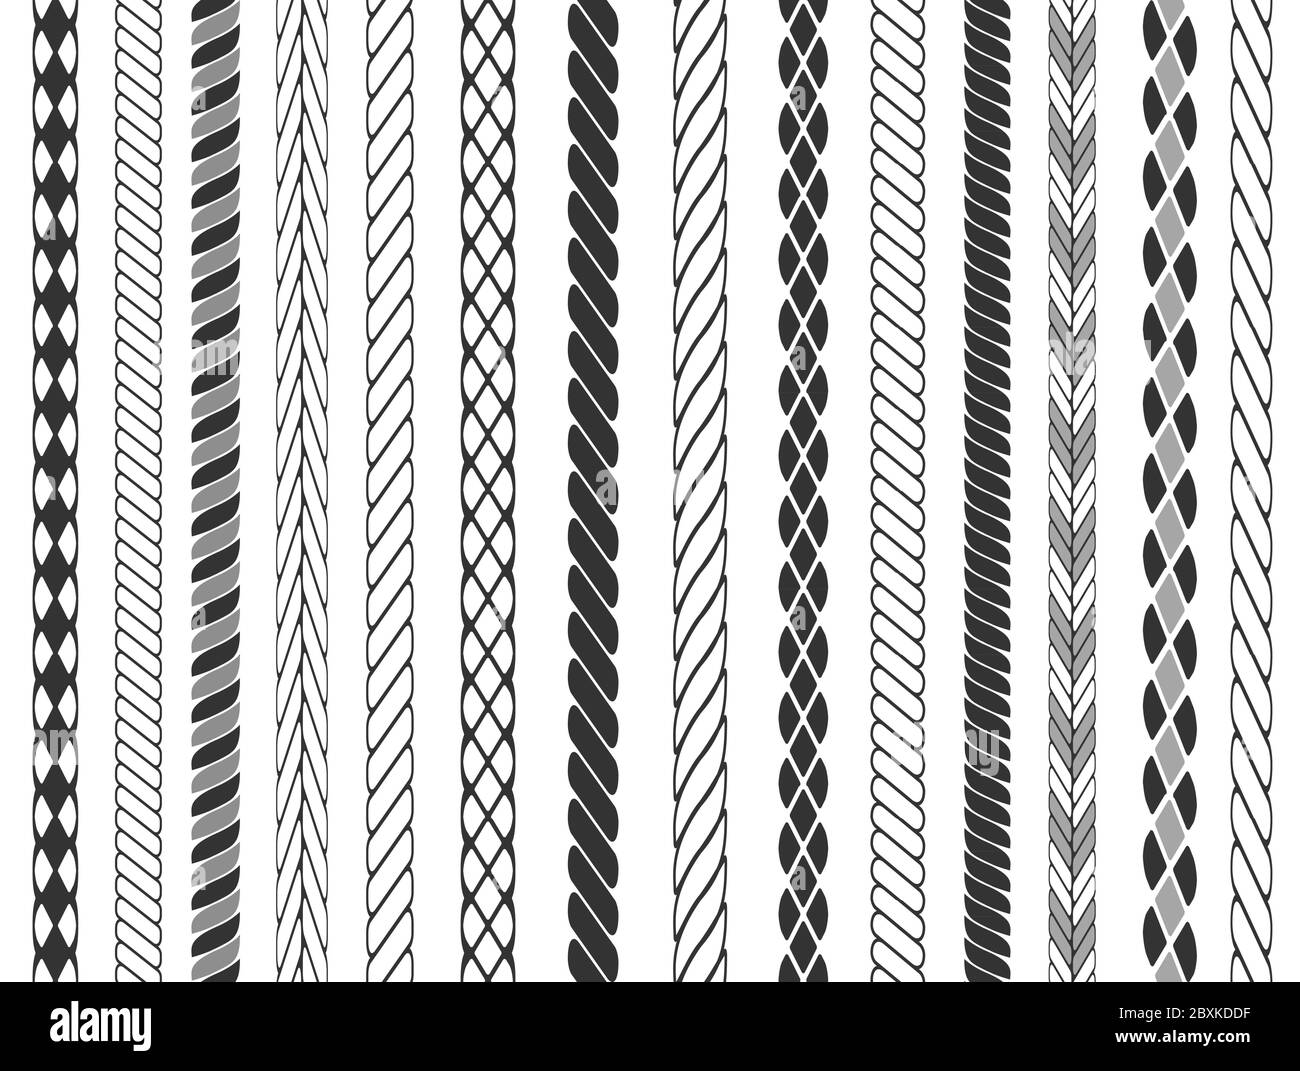 Set of rope brushes. Seamless rope stripes isolated on background. Vector illustration. Stock Vector